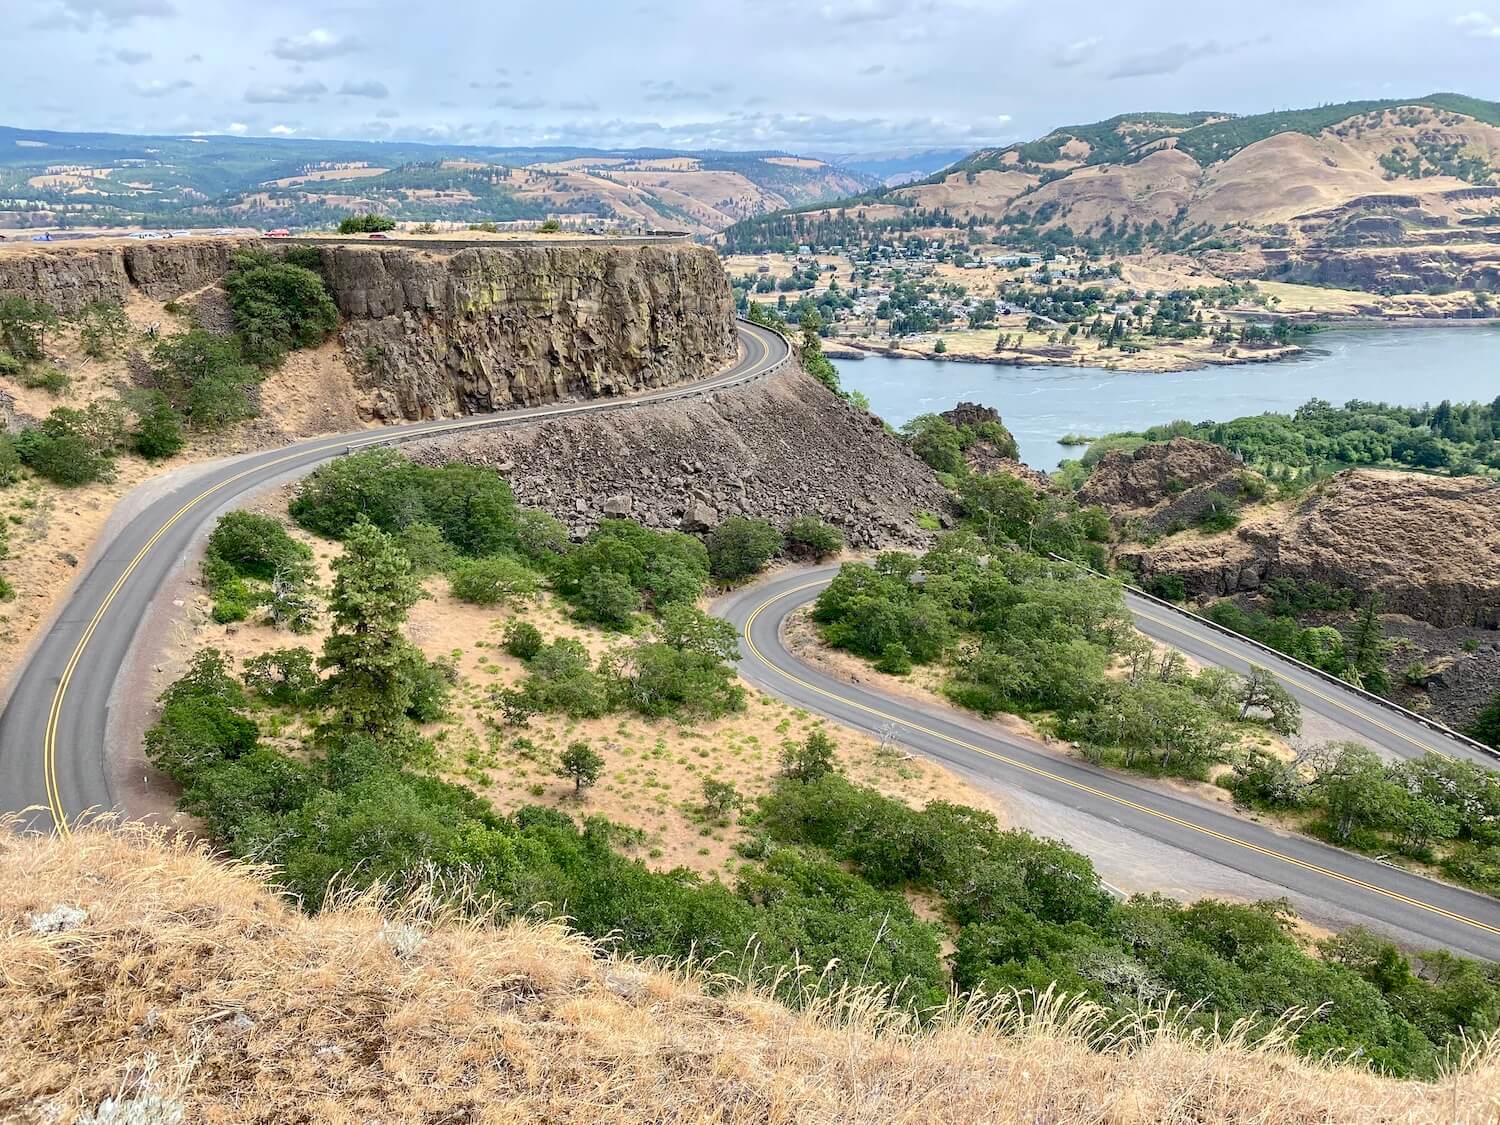 The curving road near the Rowena Lookout winds up a hill covered with yellow dried grasses and small green trees.  The Columbia River is visible in the background.  This photo was taken near The Dalles, Oregon. 